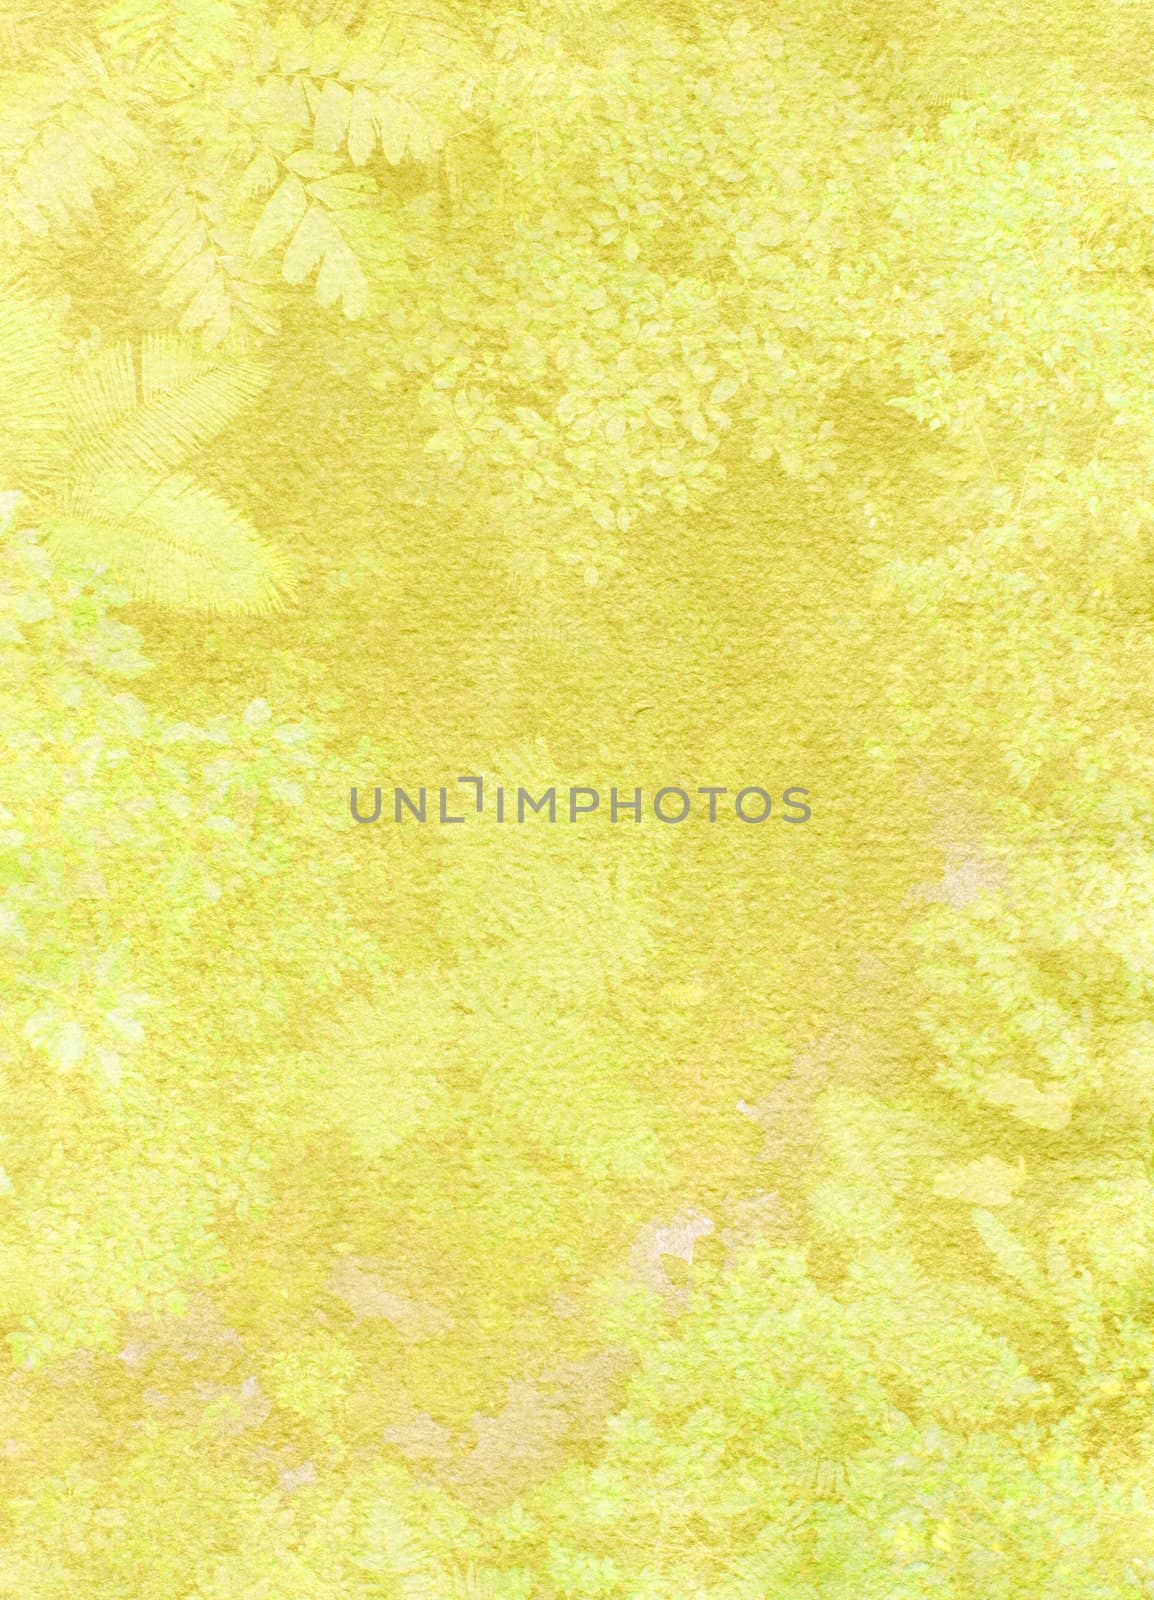 Decorative Textured green and yellow nature background.